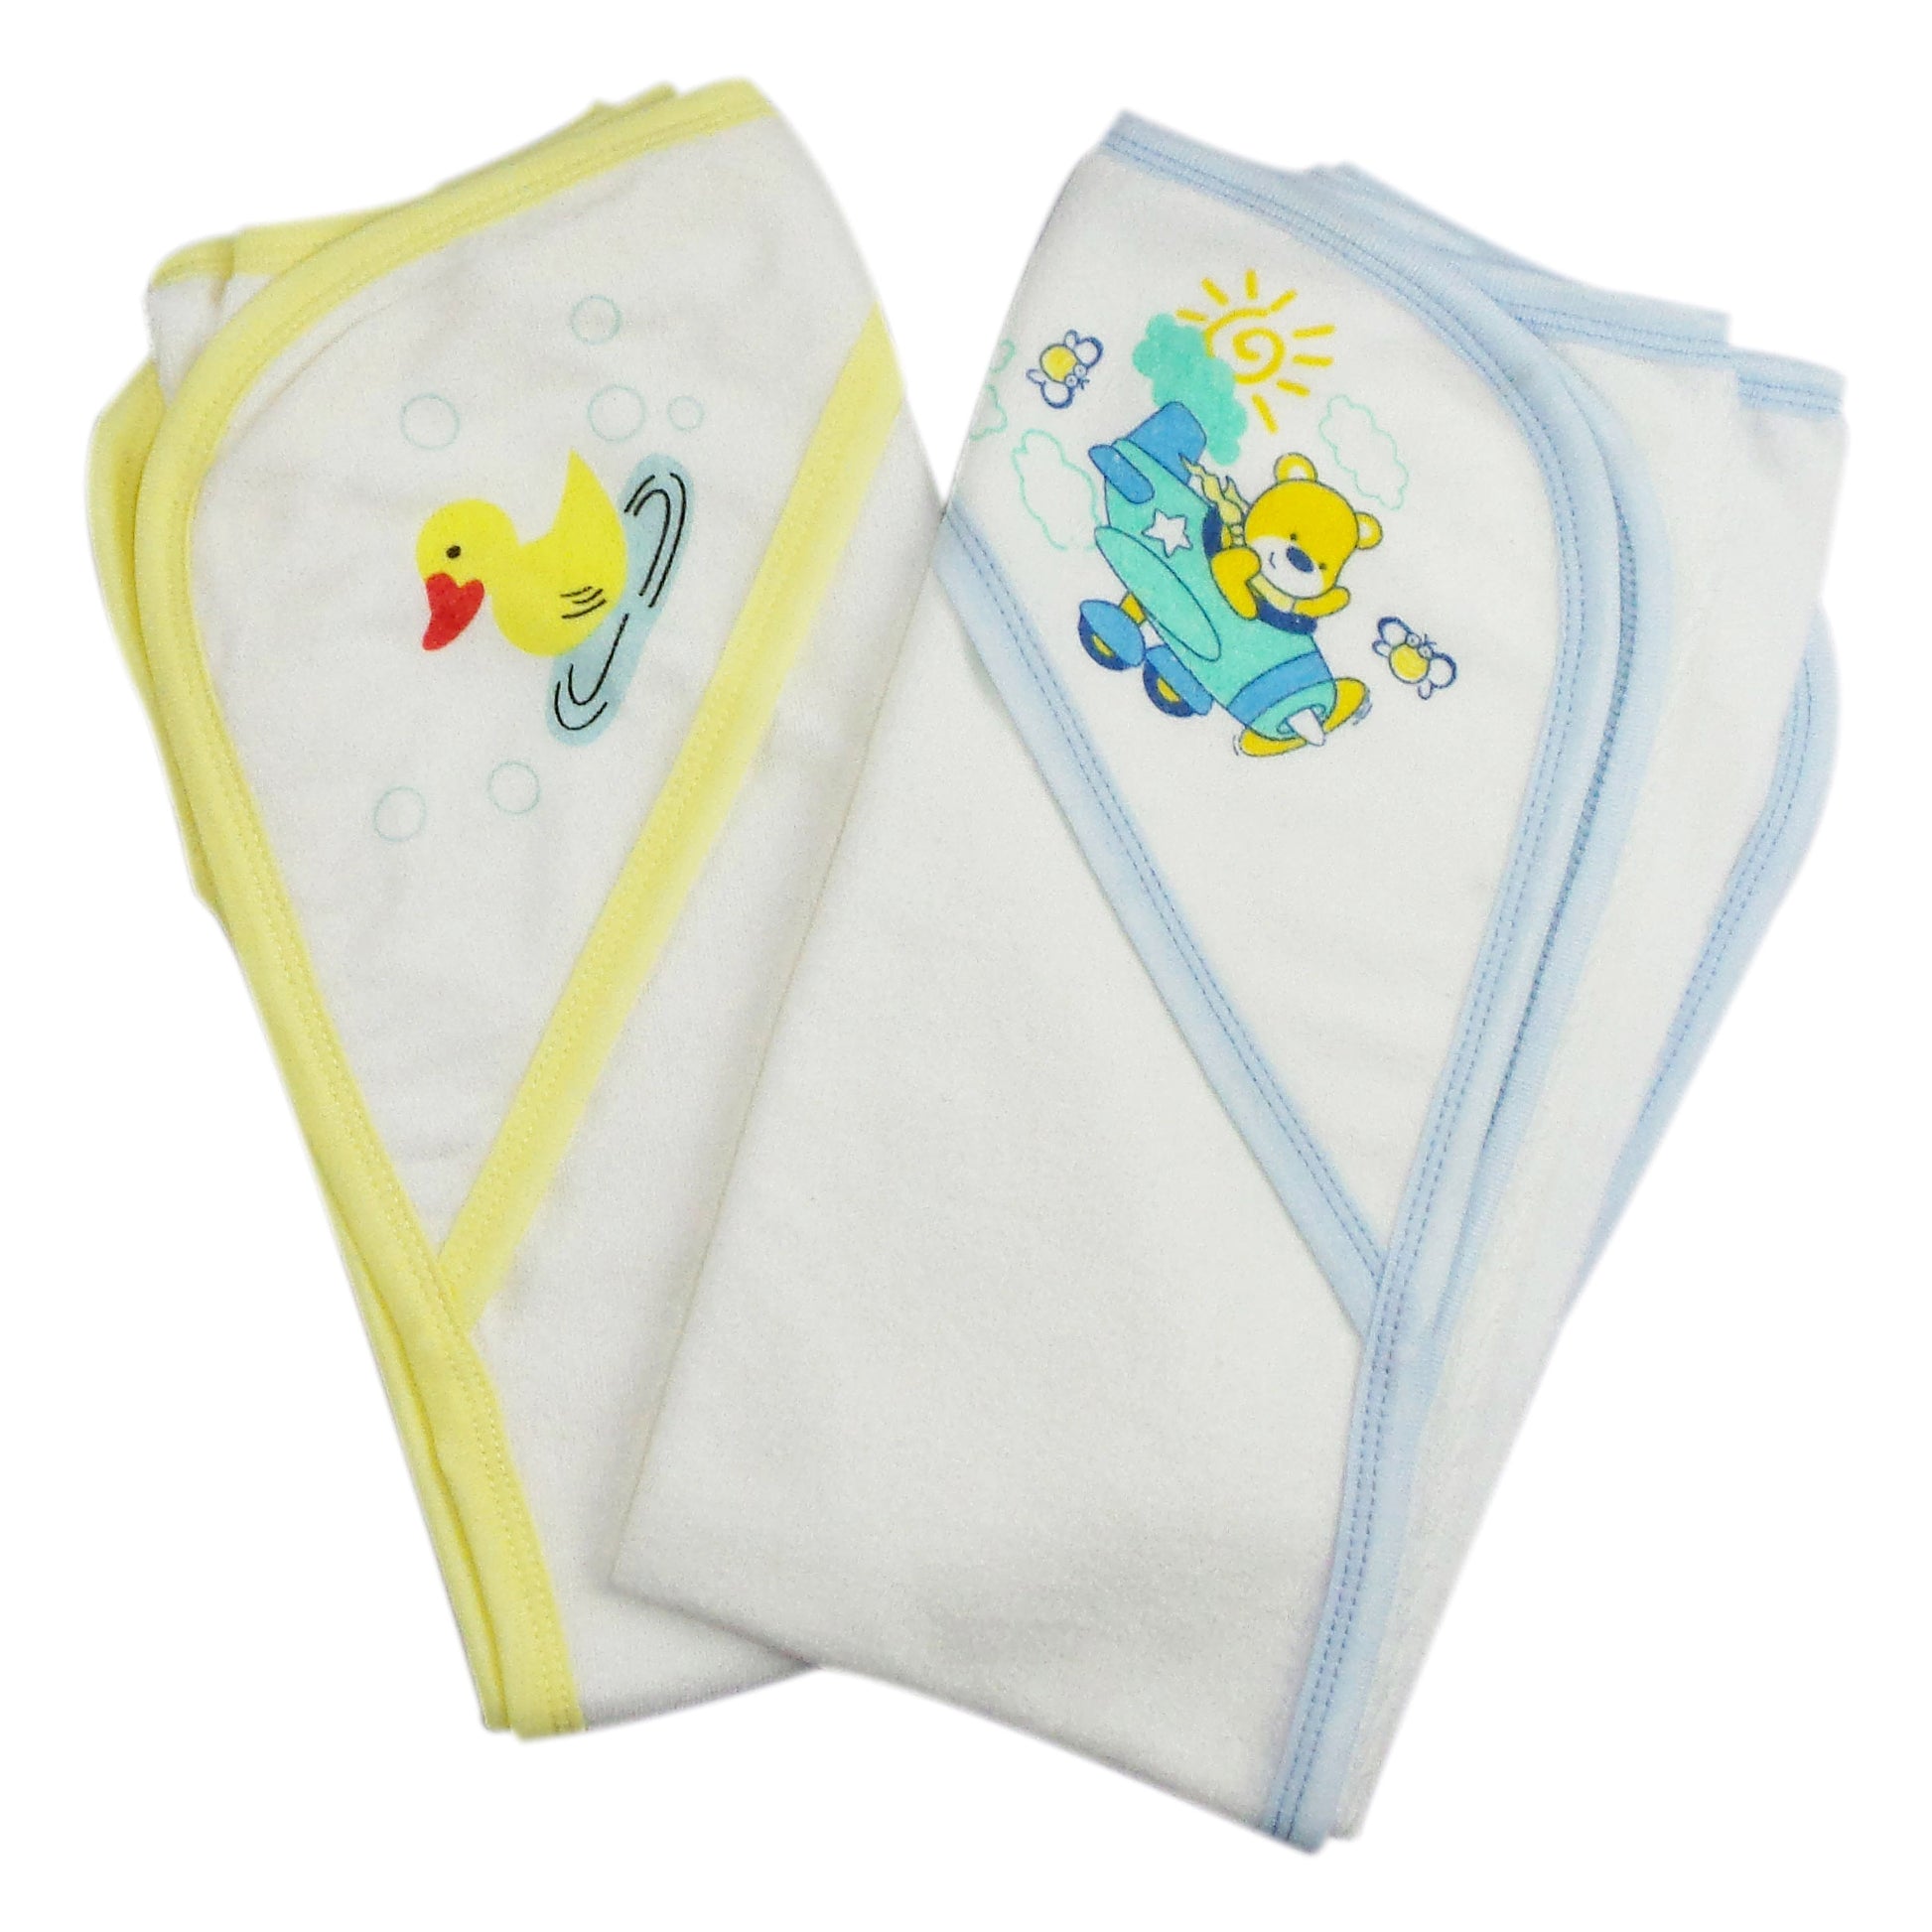 Infant Hooded Bath Towel (Pack of 2) 021-Yellow-021B-Blue